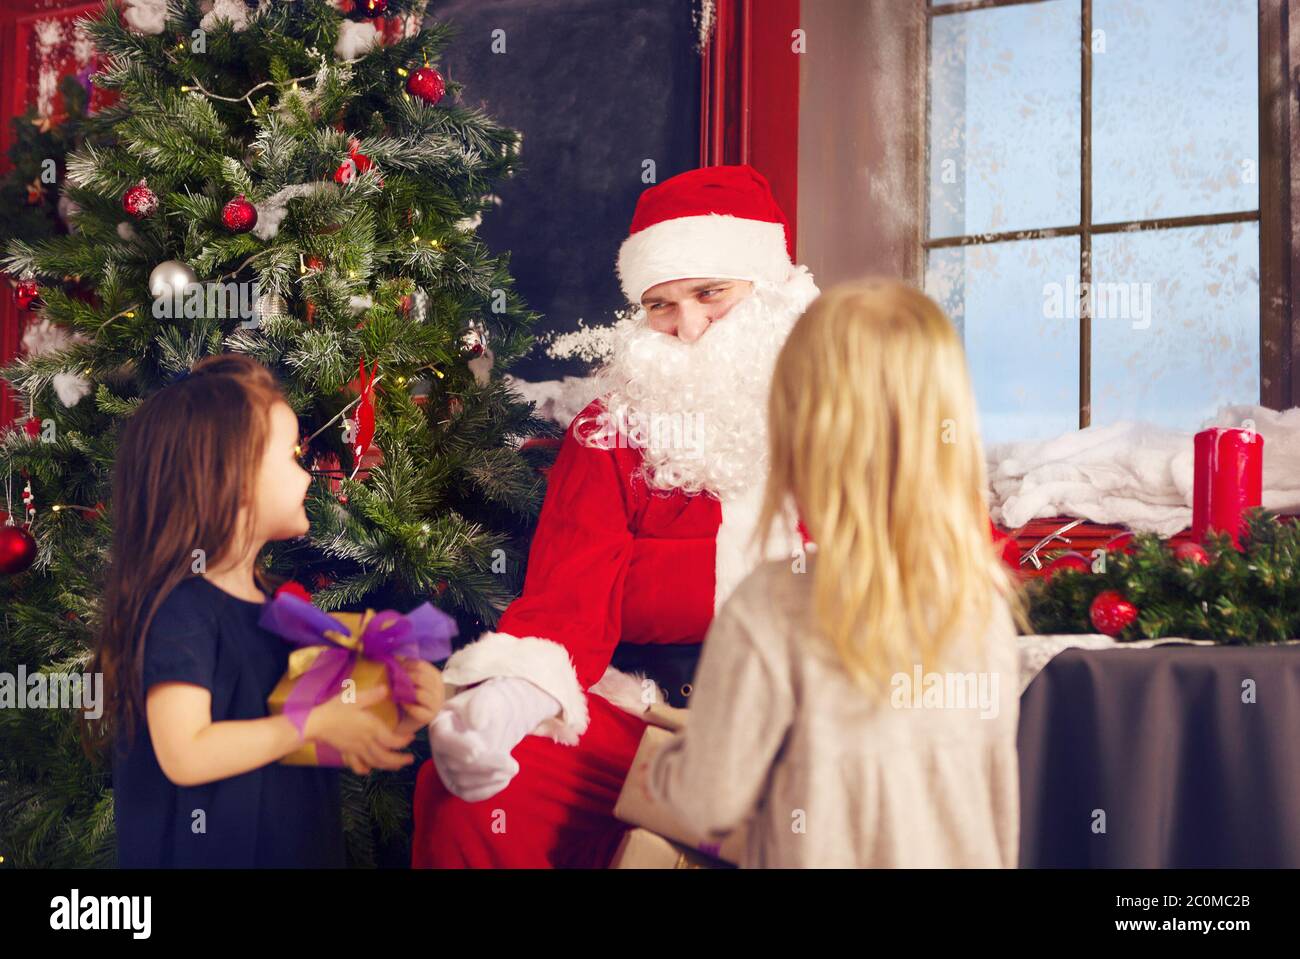 Smiling little girl with Santa Claus and gifts Stock Photo